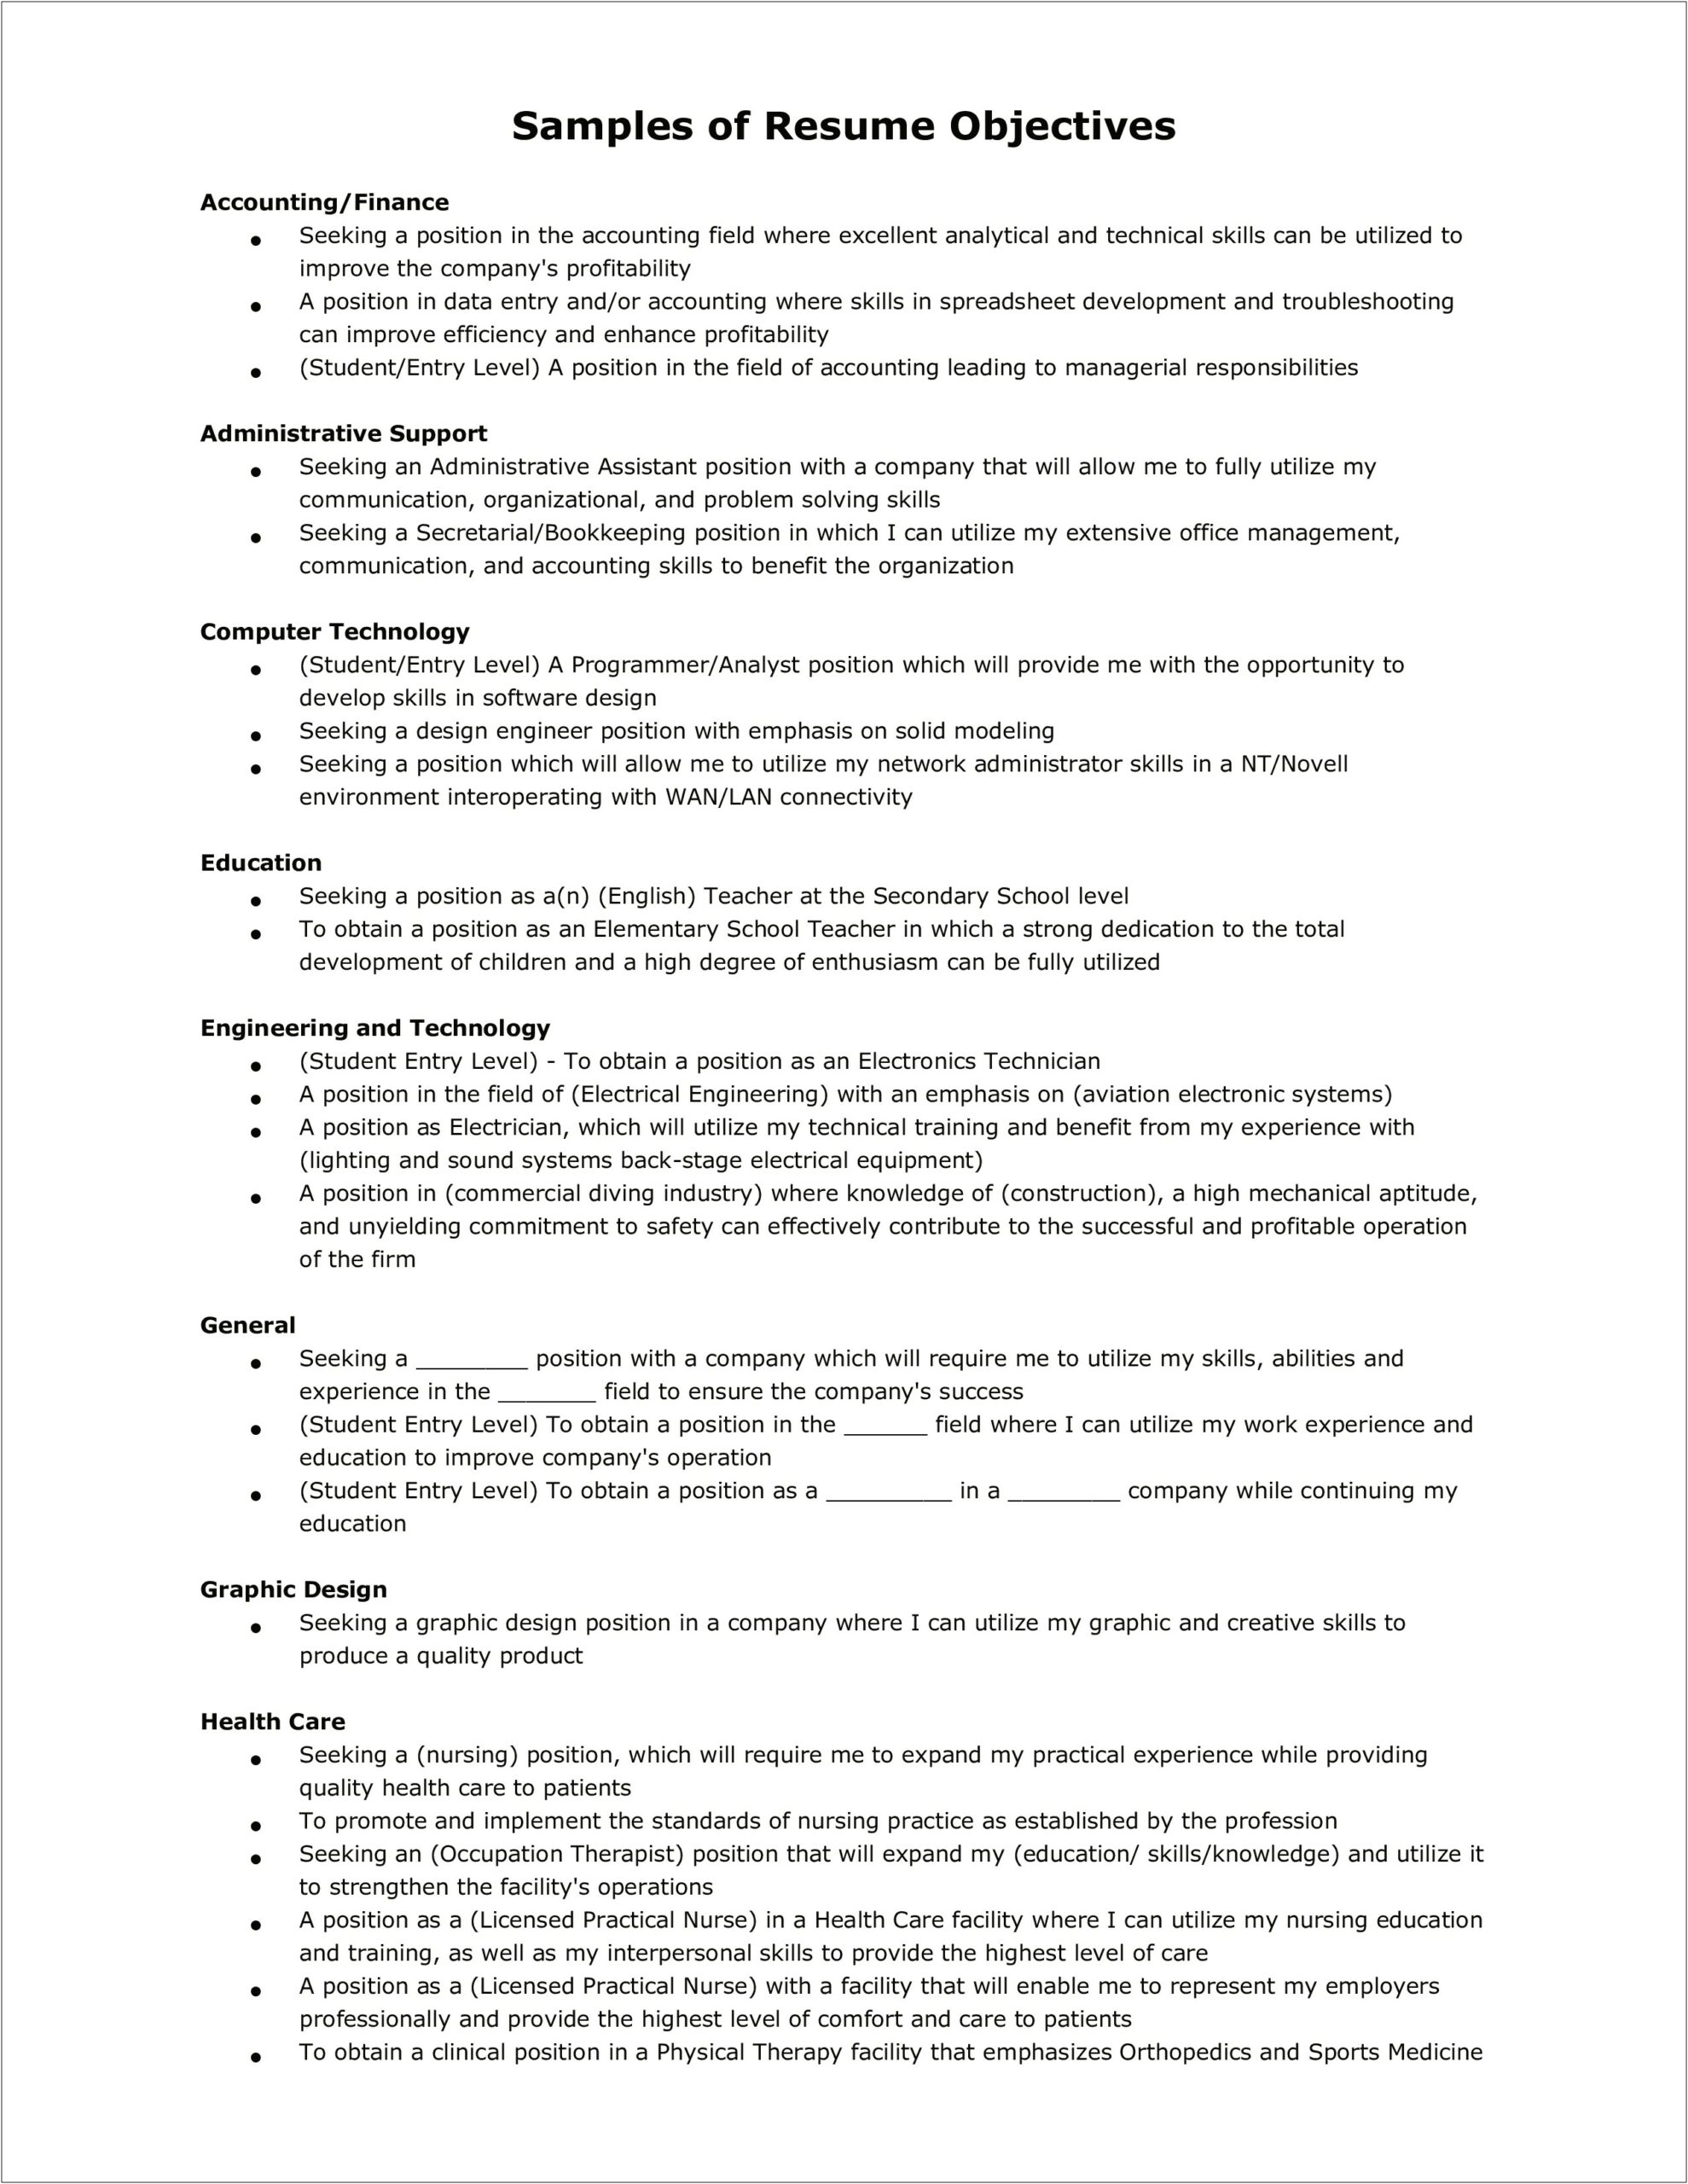 Resume Objective Examples For School Administrators